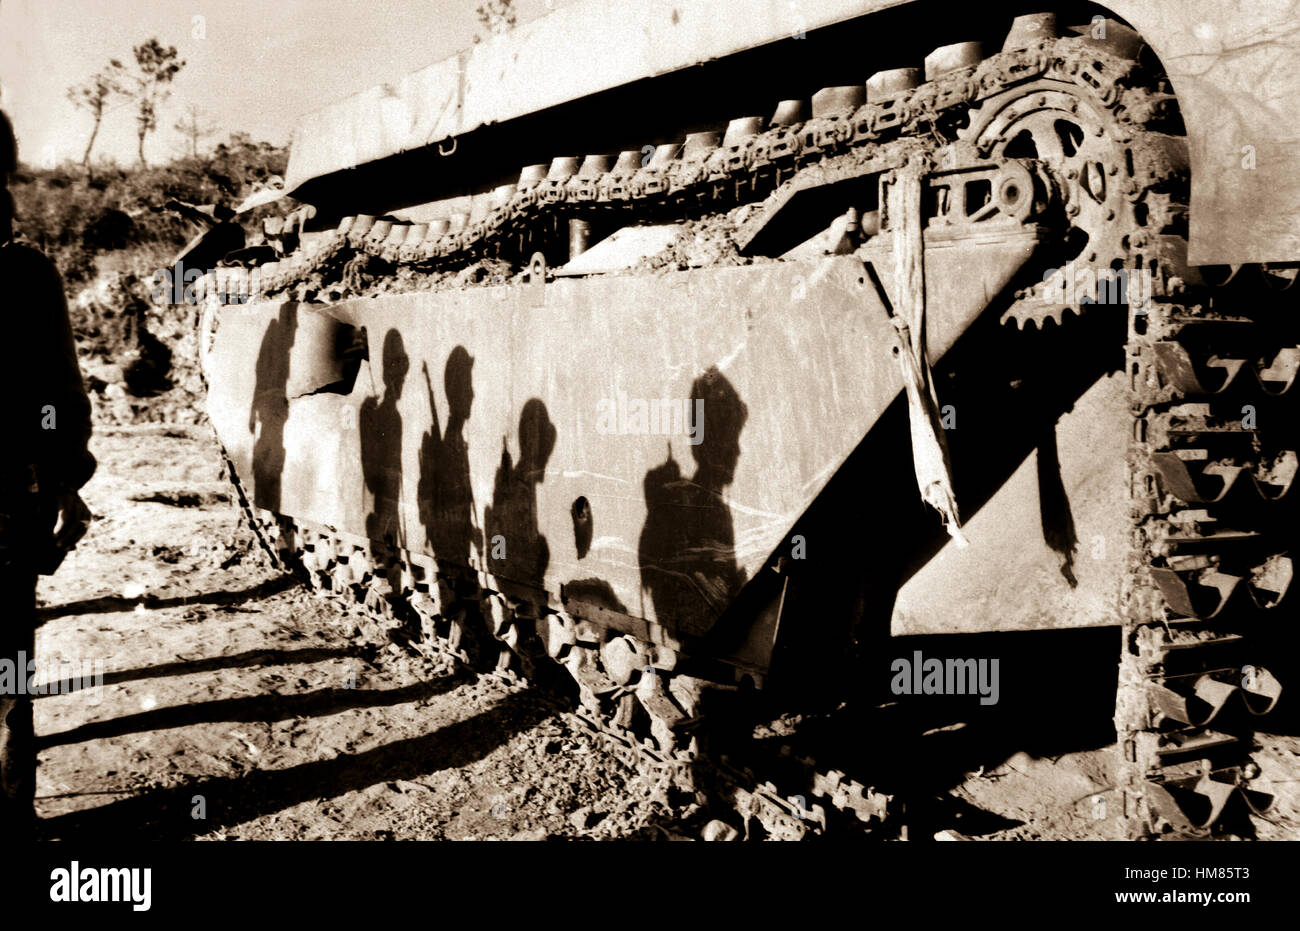 On the flank of a battle-wrecked alligator tank the Okinawa sun casts the shadows of 6th Division Marines as they move into to mop up the southern tip of the island.  1945.  Cpl. A. J. Giossi.   (Marine Corps) Exact Date Shot Unknown NARA FILE #:  127-N-95-127910 WAR & CONFLICT BOOK #:  1232 Stock Photo